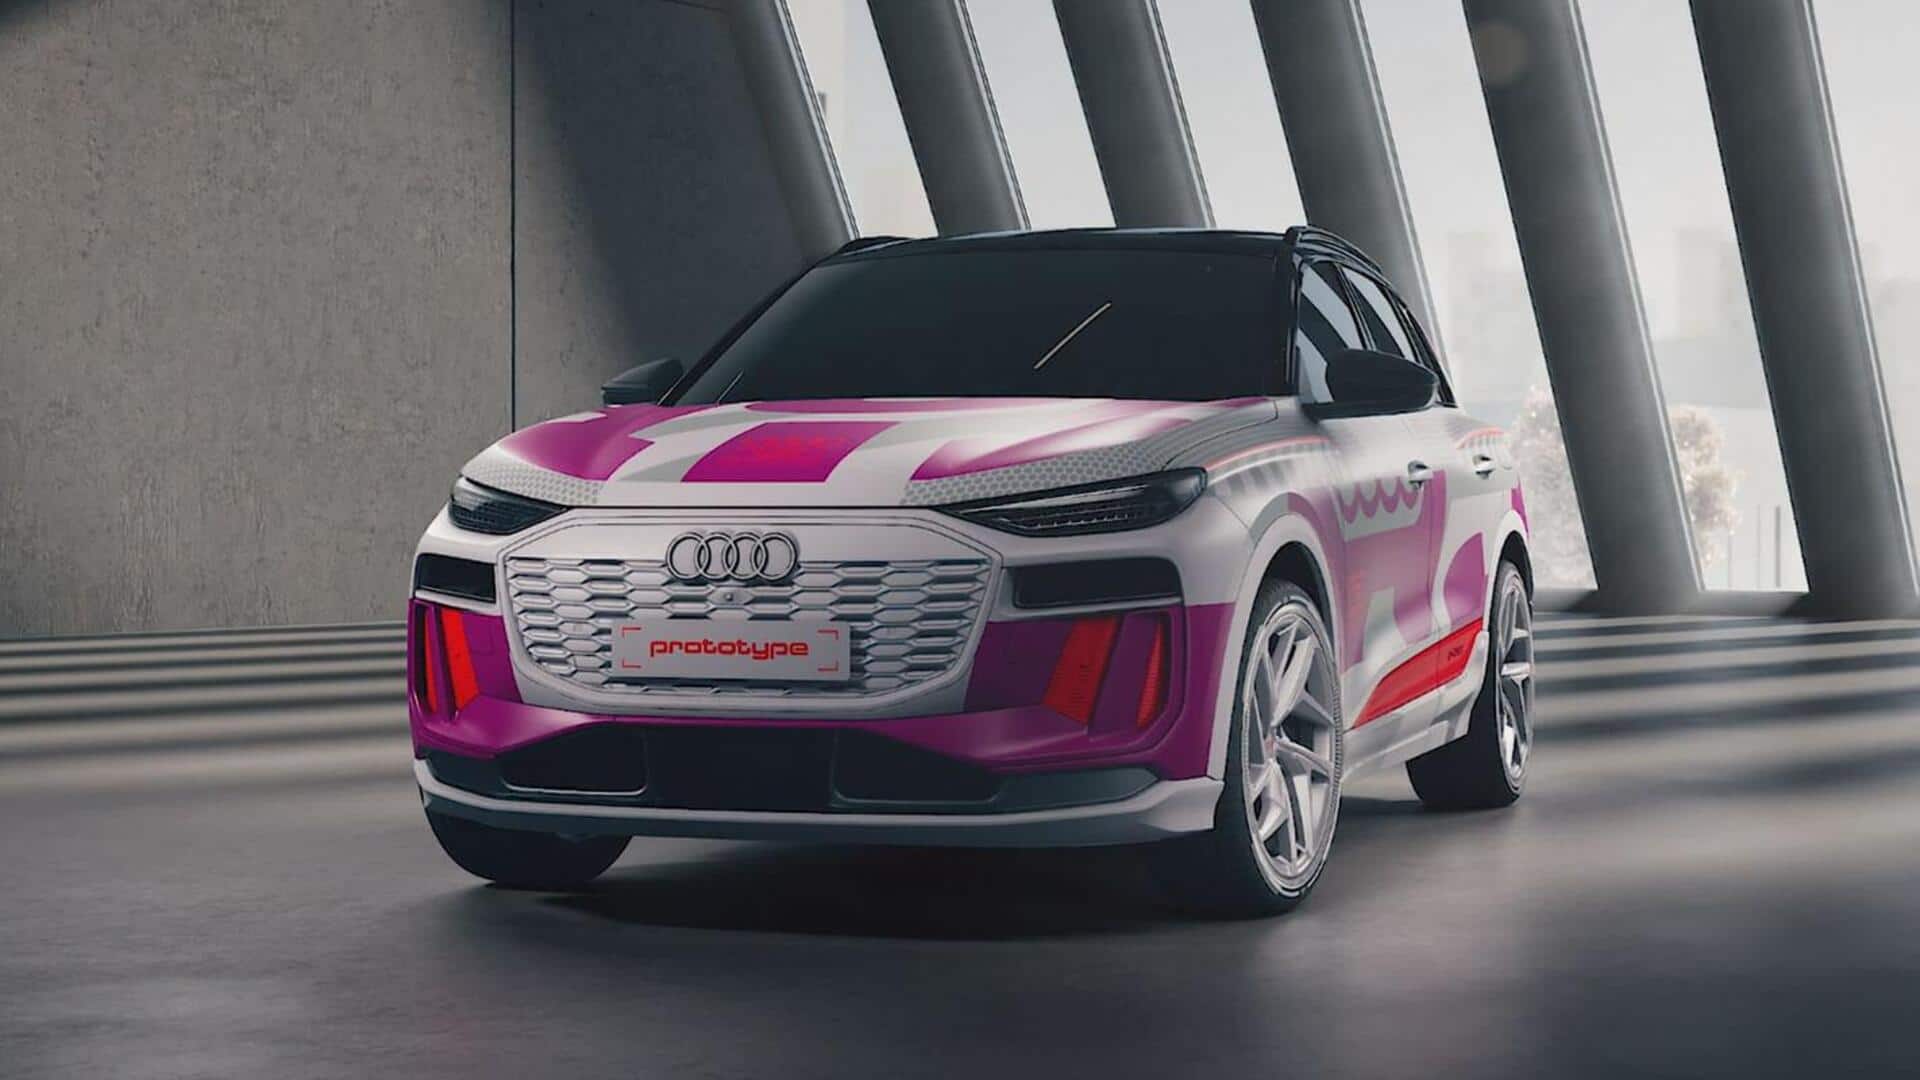 Audi Q6 e-tron to debut on March 18